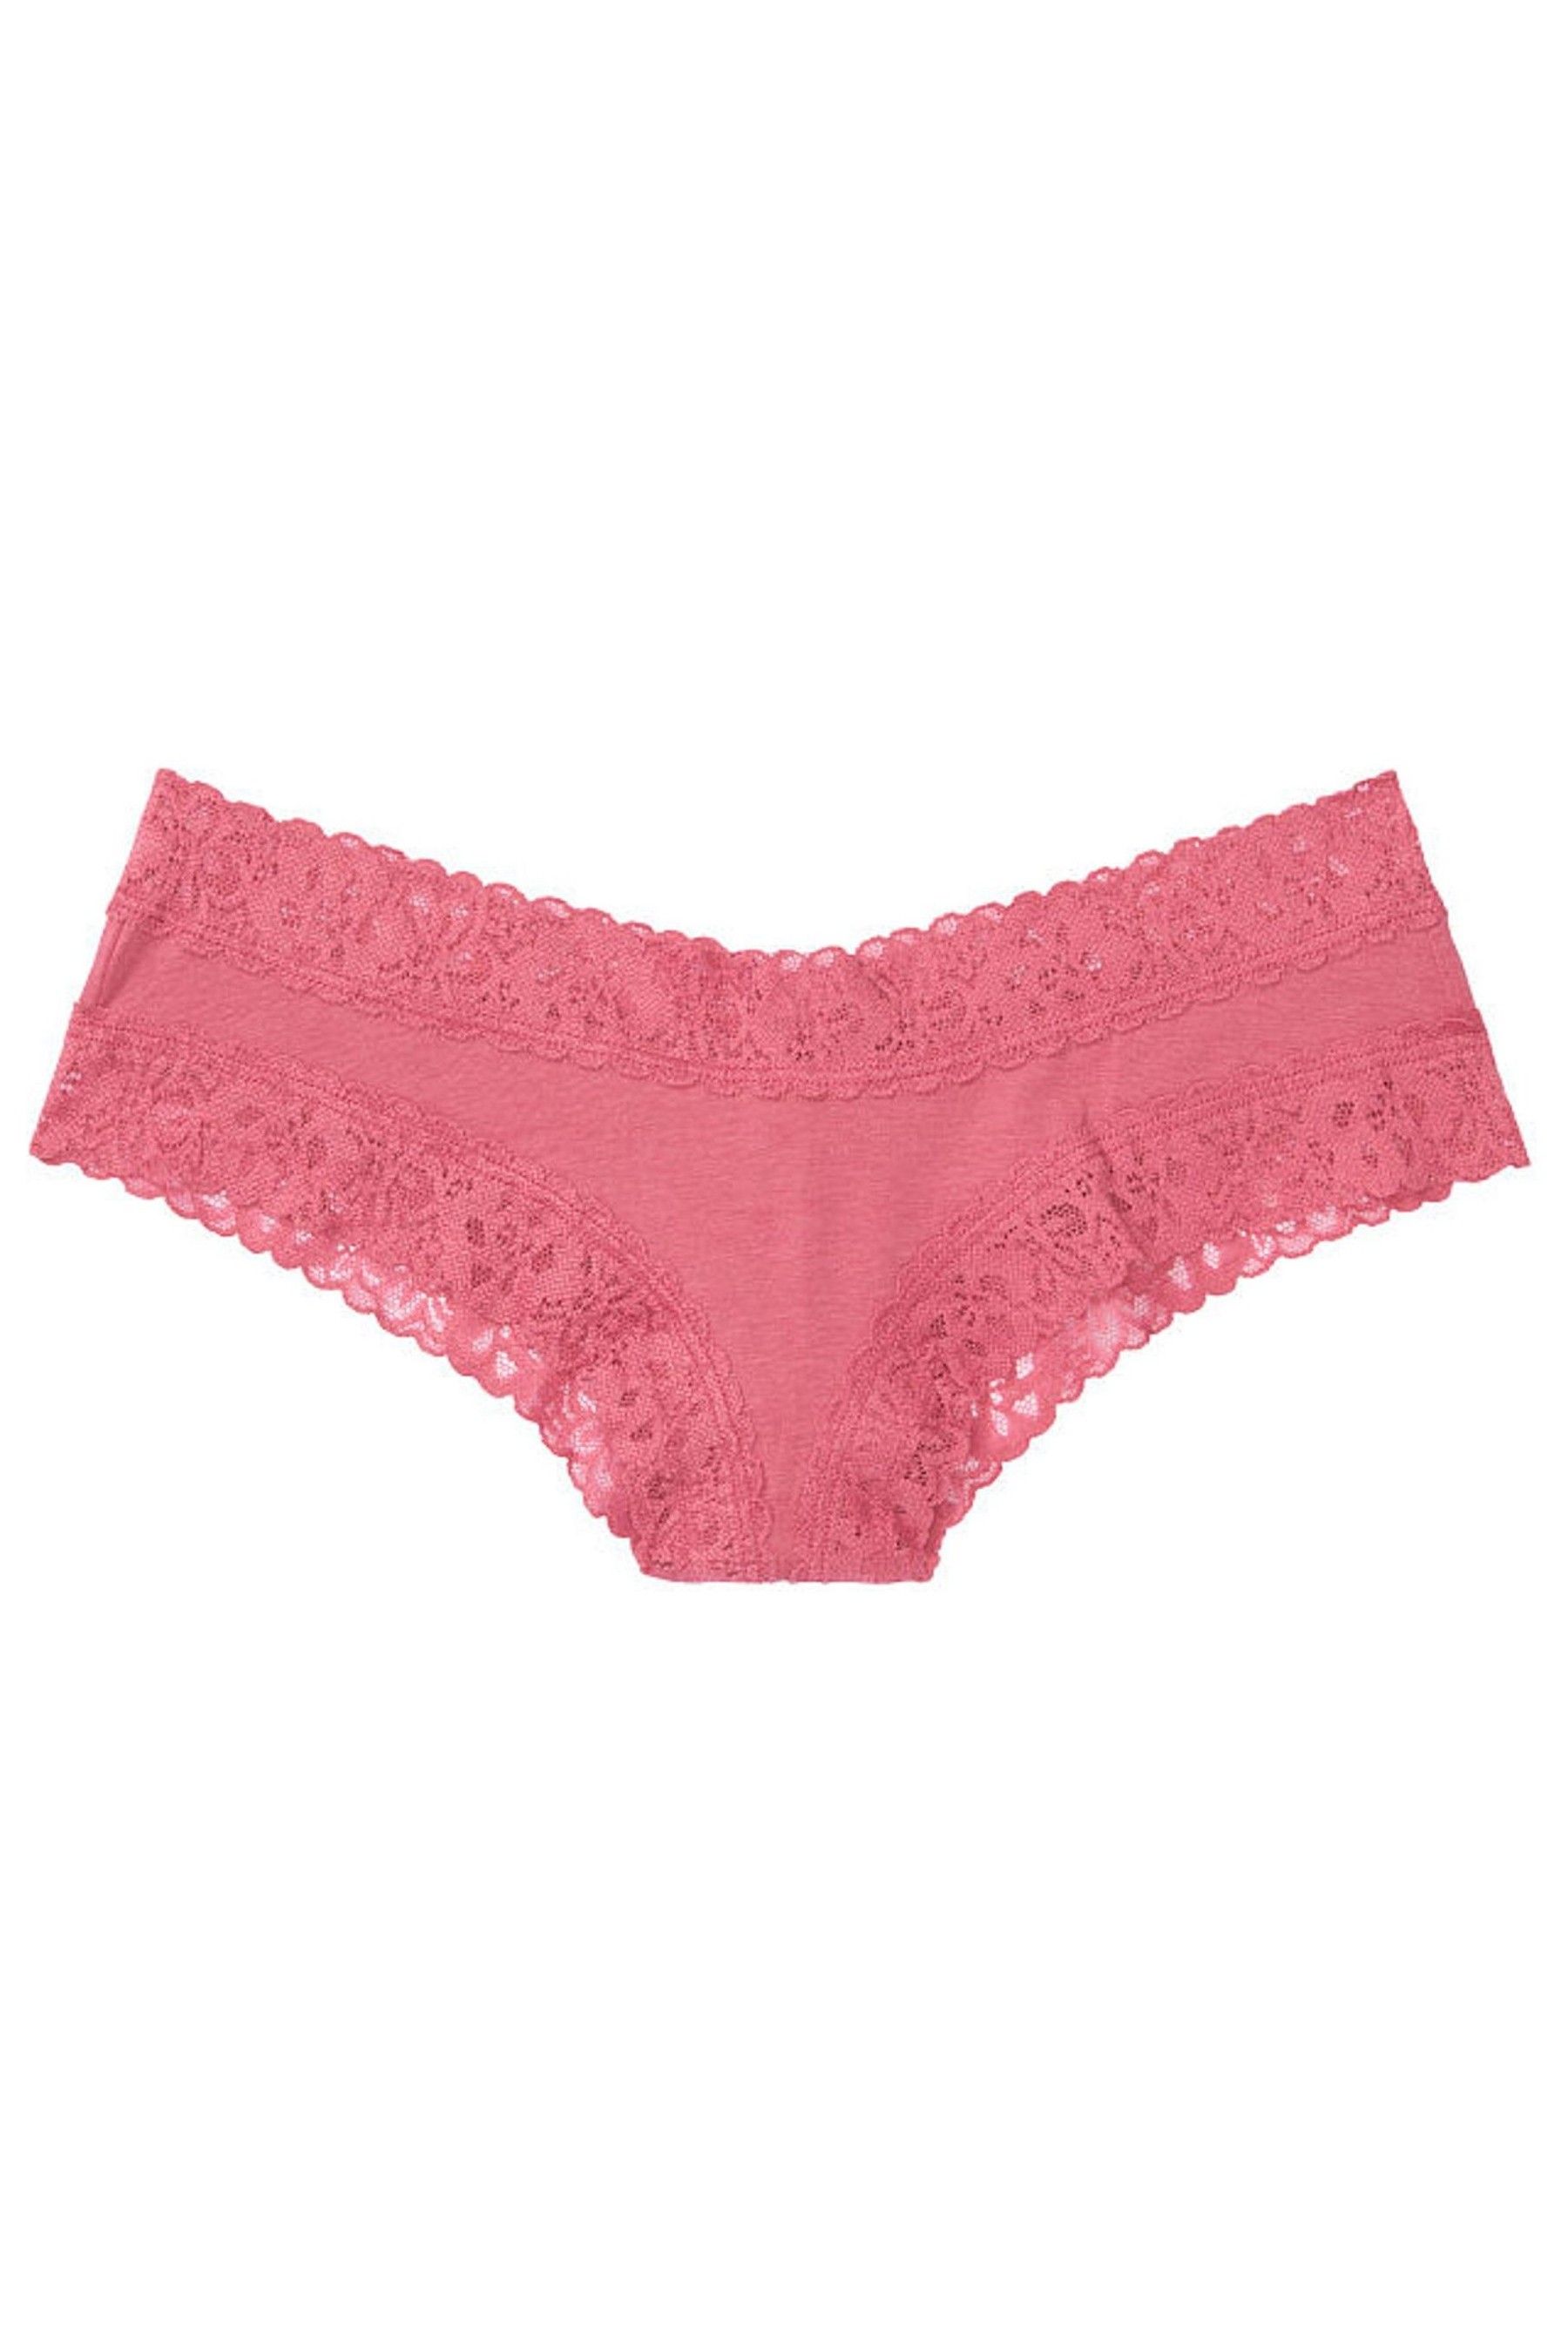 Buy Victoria S Secret Lace Waist Cheeky Panty From The Victoria S